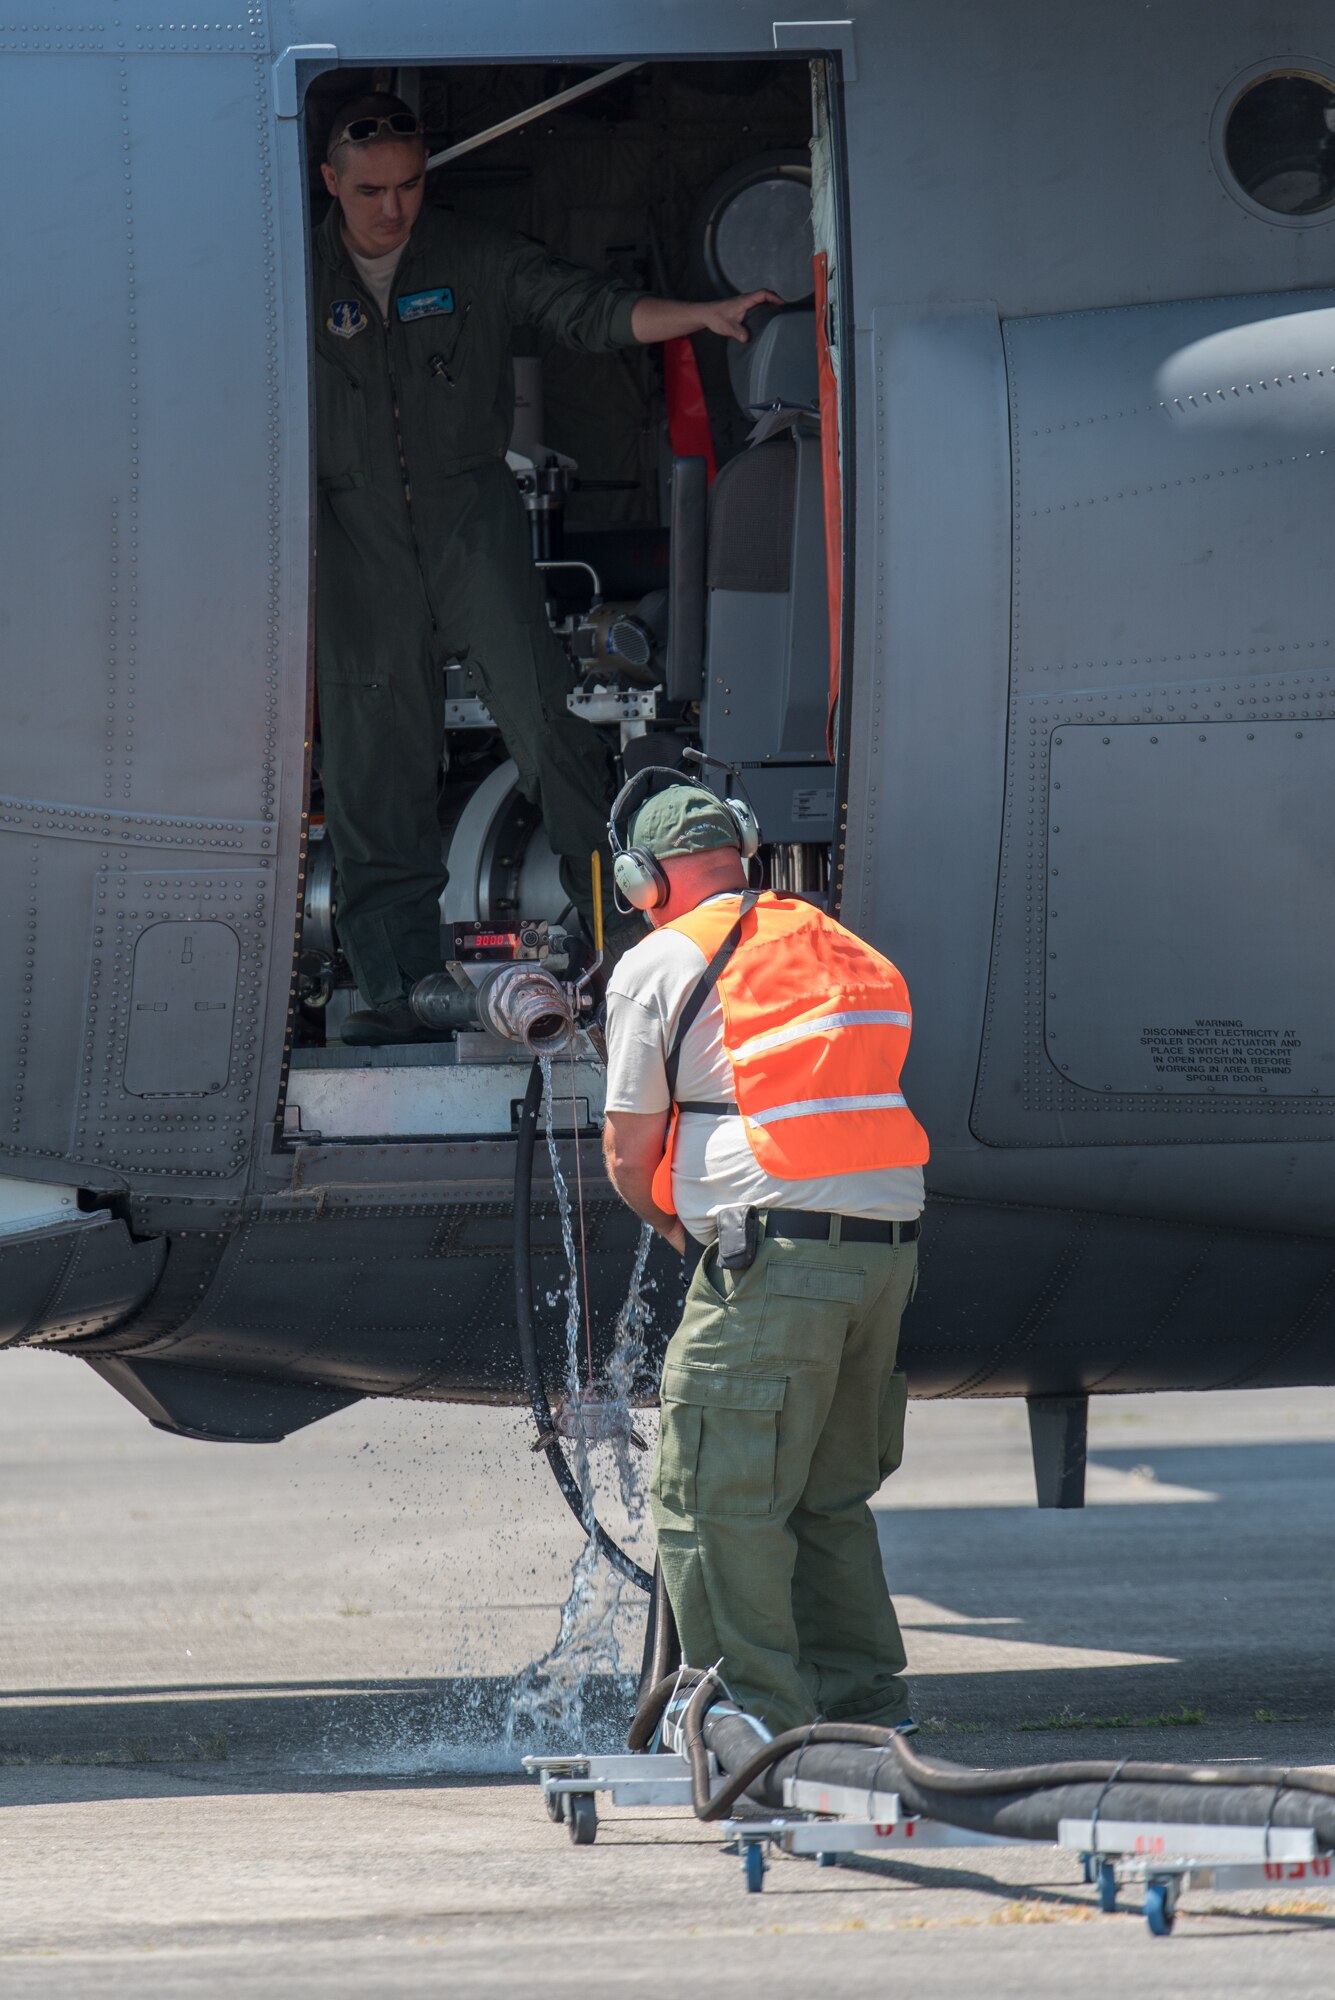 A U.S. Forest Service technician disengages a coupling after filling the tank on a Modular Airborne Fire Fighting System (MAFFS) equipped C-130H Hercules aircraft assigned to the 153rd Airlift Wing, Wyoming Air National Guard May 5, 2015 at Donaldson Field in Greenville, South Carolina. Aircrews from the 153rd Airlift Wing and 145th Airlift Wing flew sorties over Angeles National Forest and executed water drops as part of their annual training and recertification. (U.S. Air National Guard photo by Master Sgt. Charles Delano)